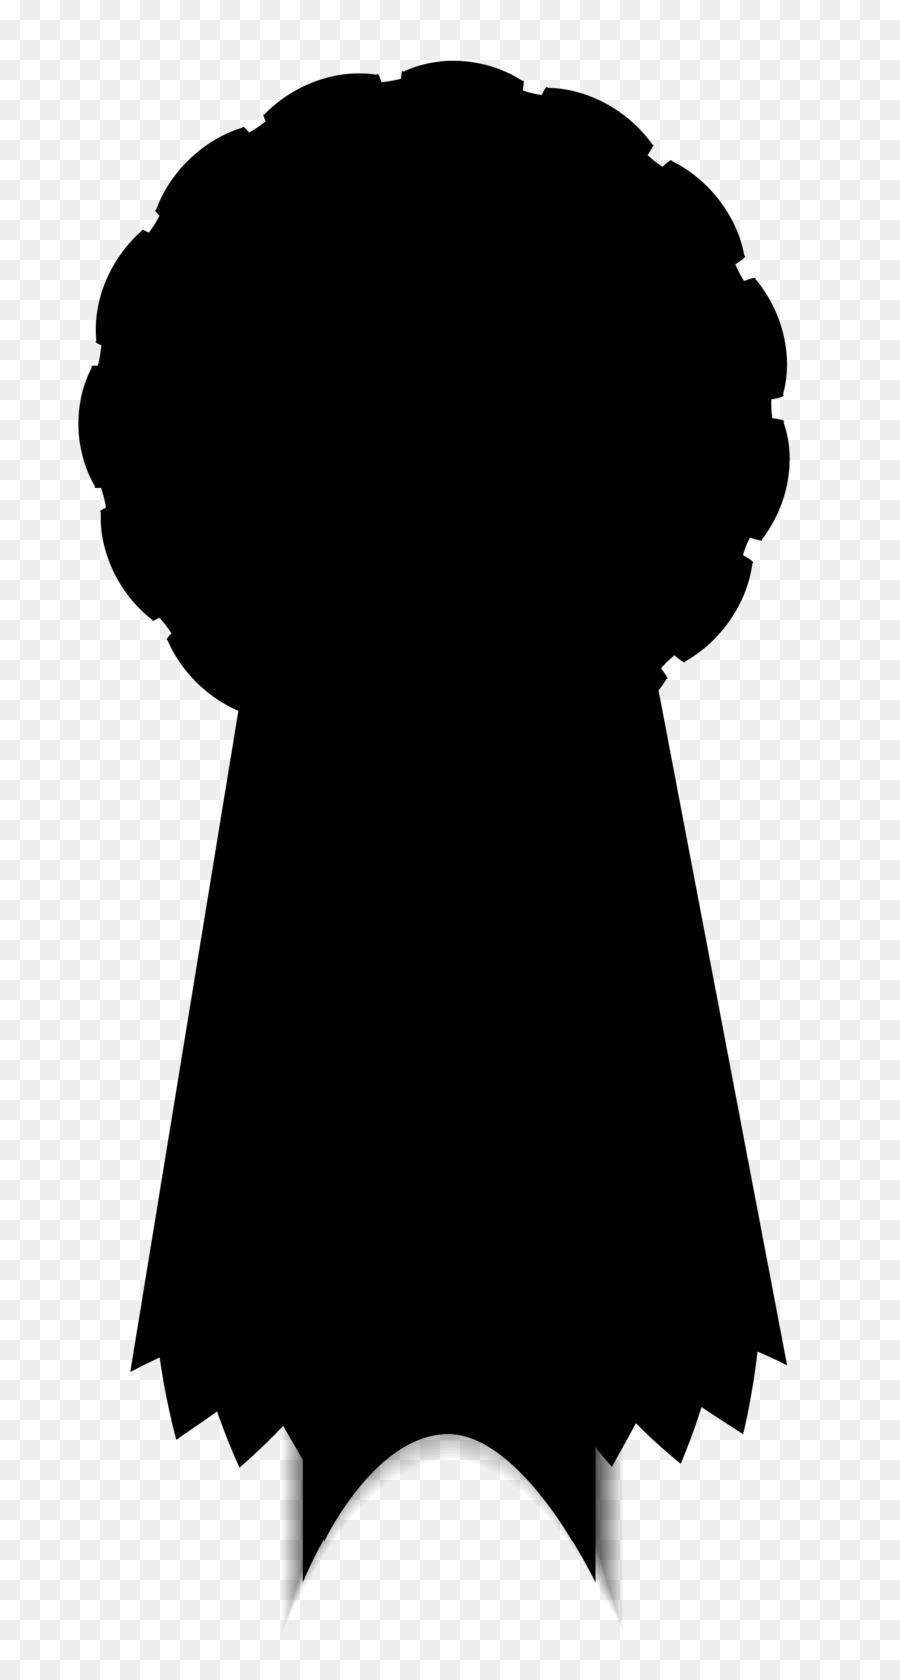 Sherlock Holmes Silhouette Clip art Image Portable Network Graphics -  png download - 1775*3301 - Free Transparent Sherlock Holmes png Download.